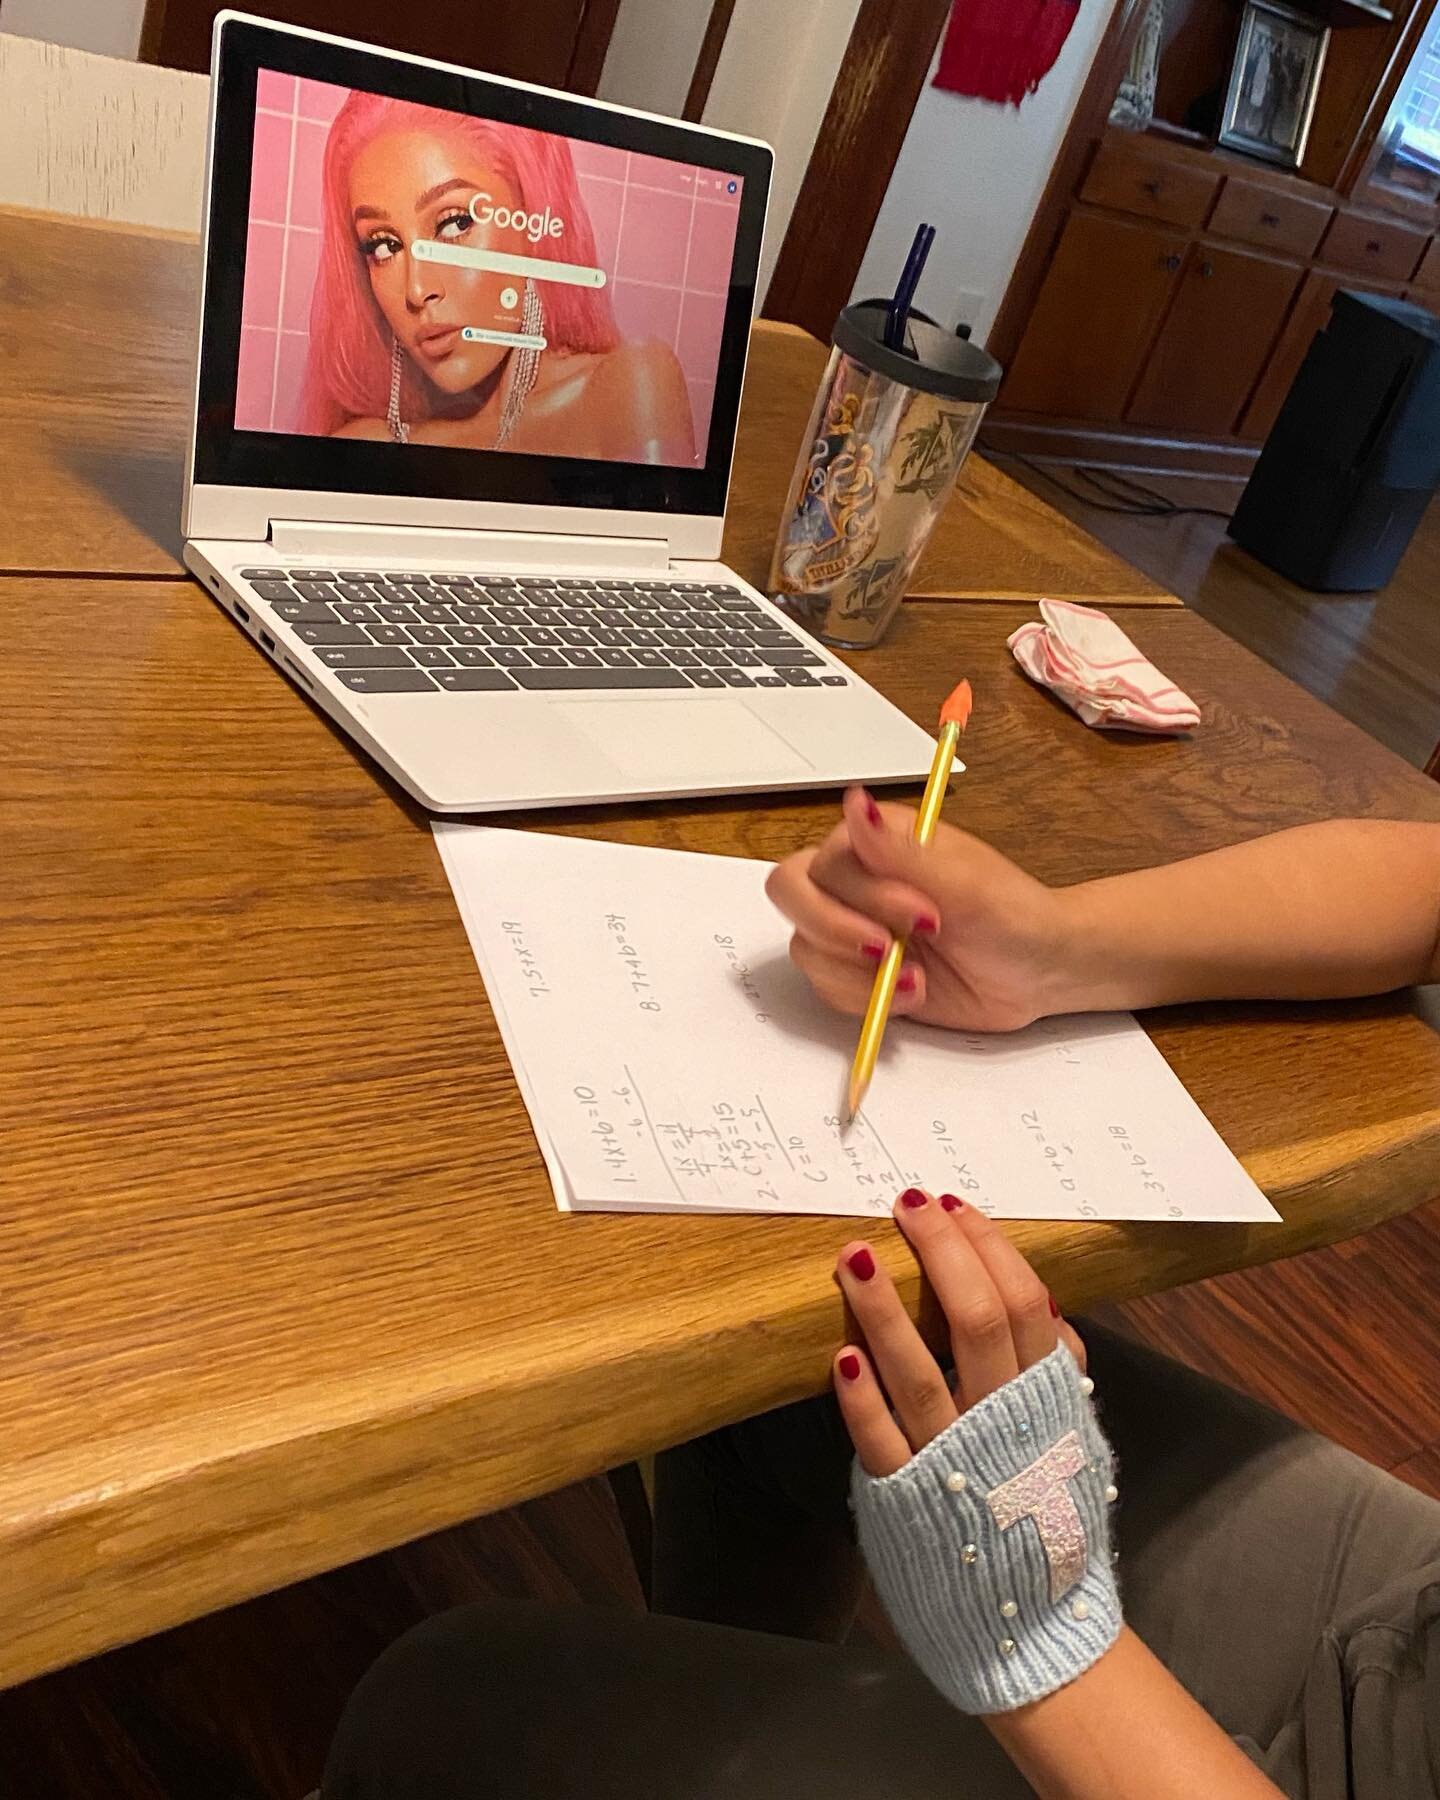 It&rsquo;s actually been great working with my students this summer. We&rsquo;re definitely keeping things a bit more chill but our work ethic doesn&rsquo;t change! My girl will be ready for 8th grade!!

#tutor #education #tutoring #learning #nyctuto